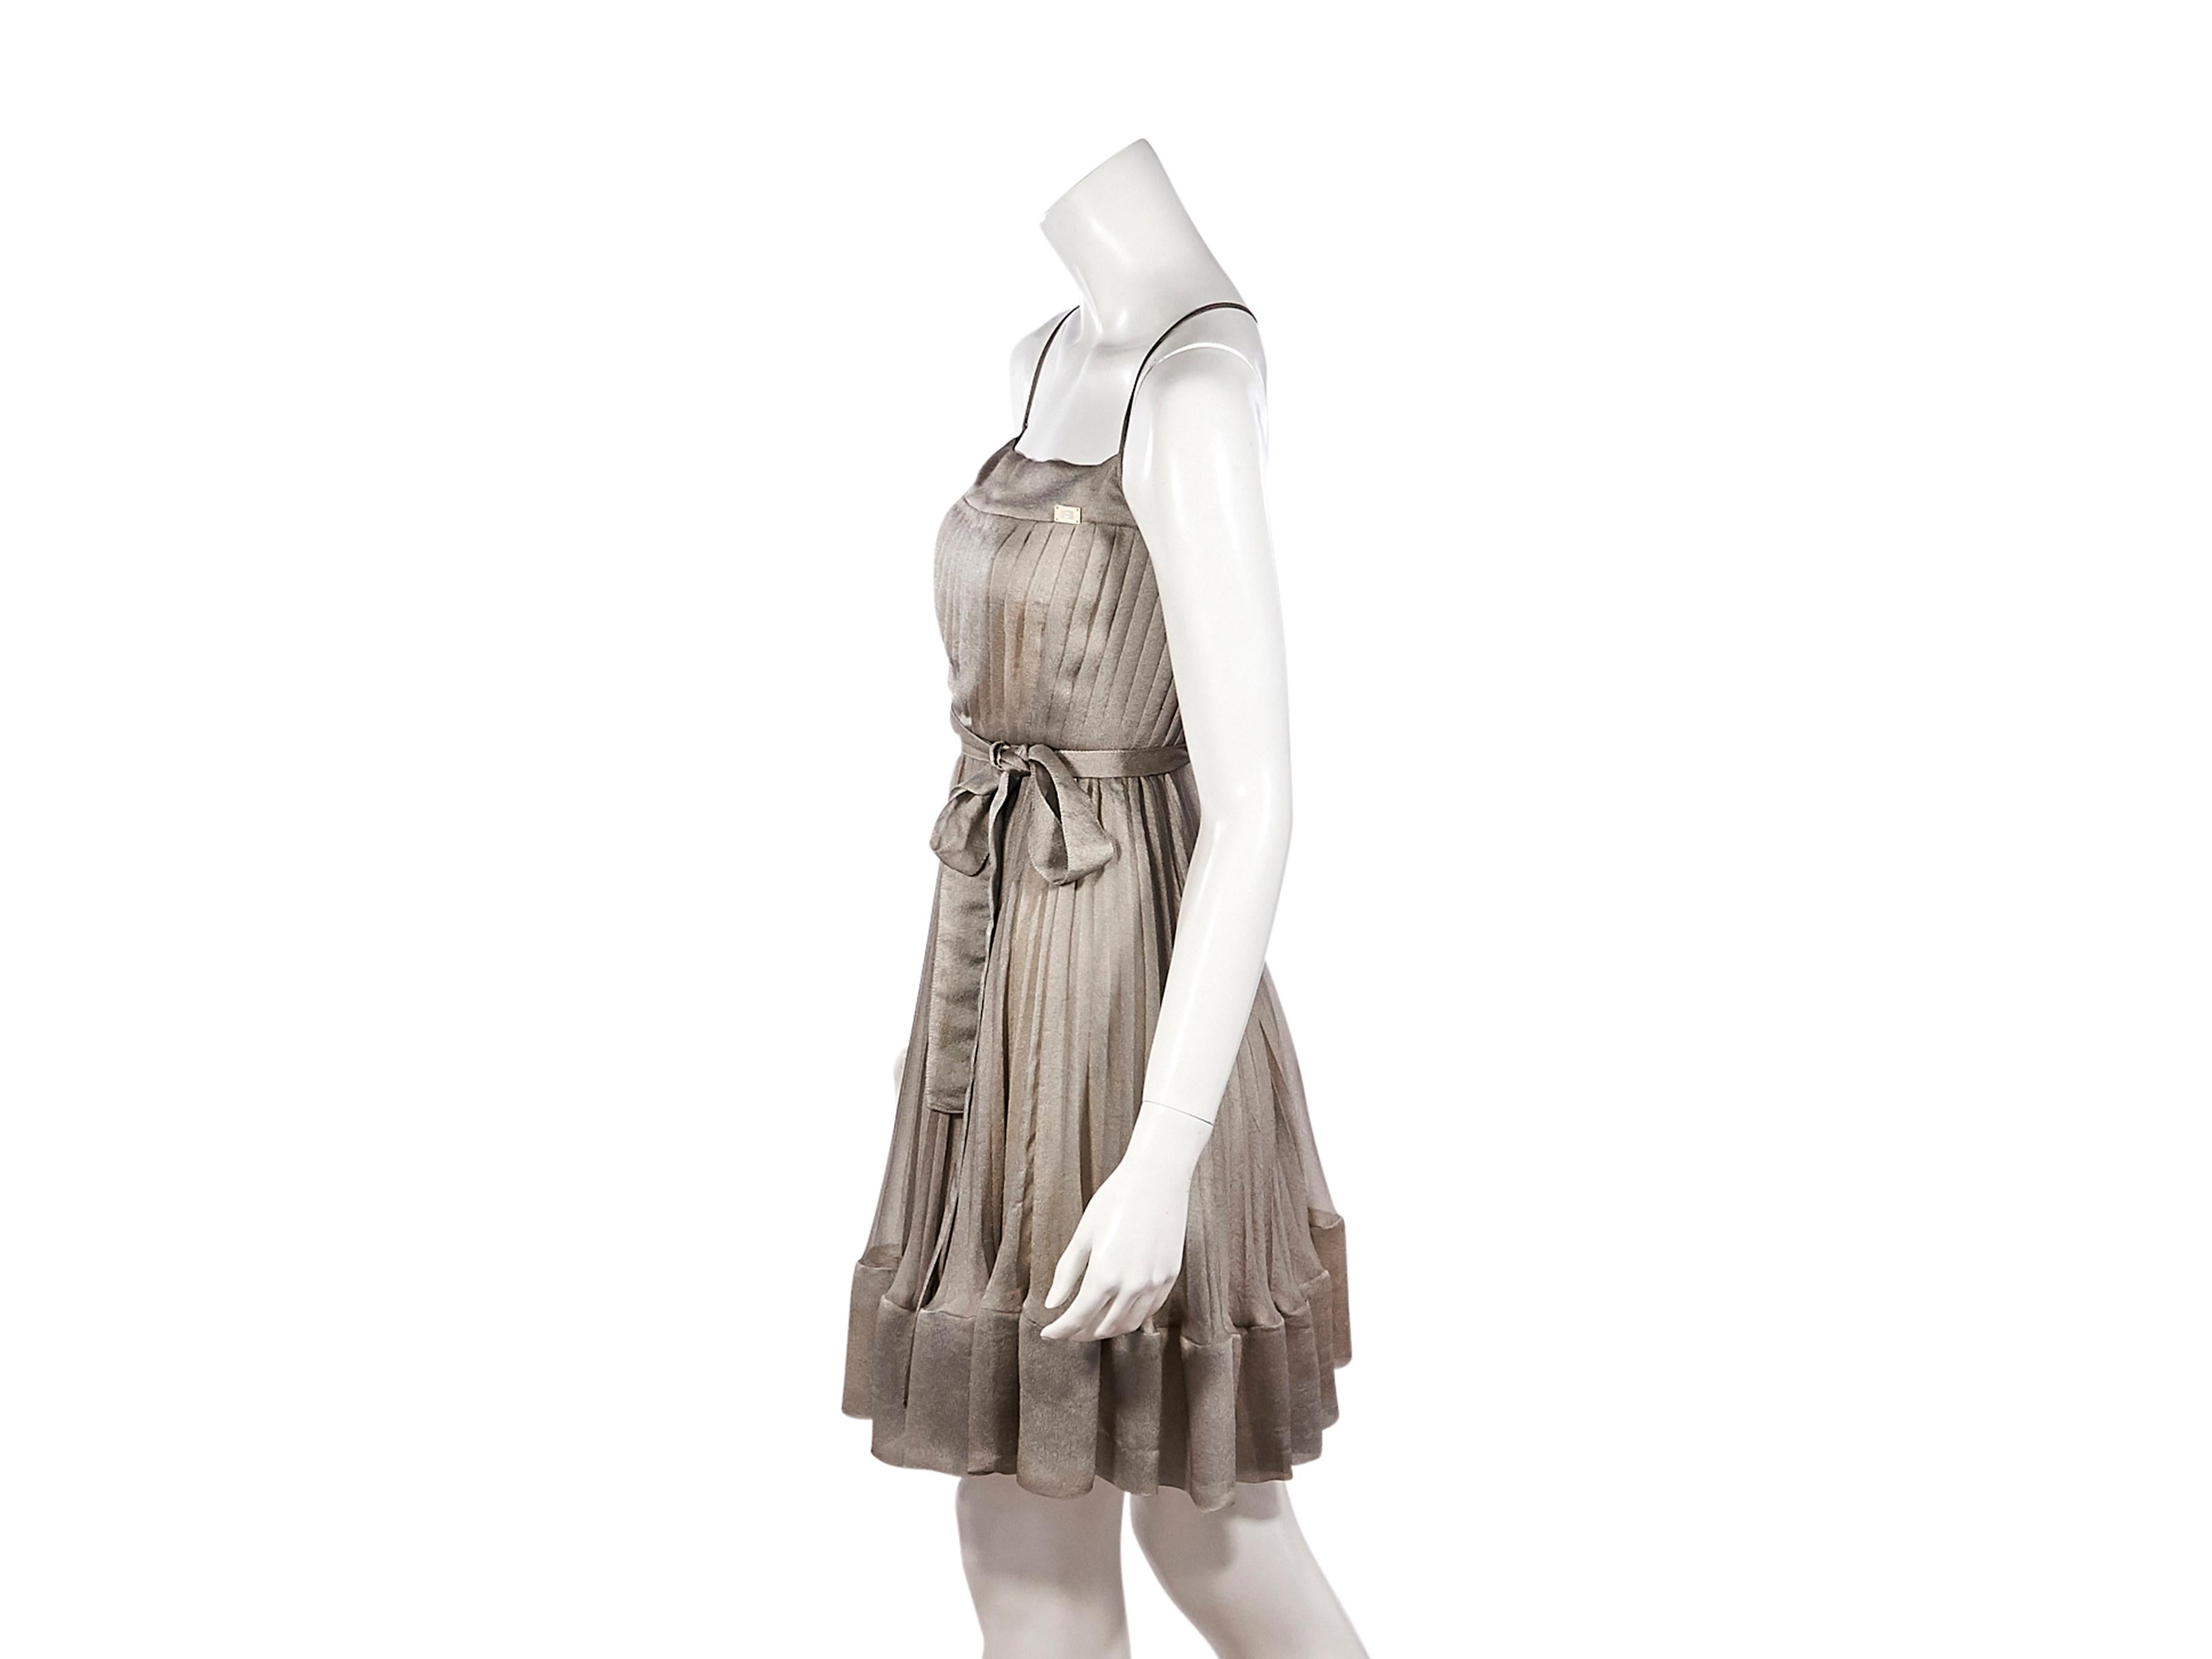 Product details:  Metallic silver pleated dress by Chanel.  From the AW 2001 collection.  Sleeveless.  Self-tie belted waist.  Concealed button and zip back closure.  Label size FR 34.  32